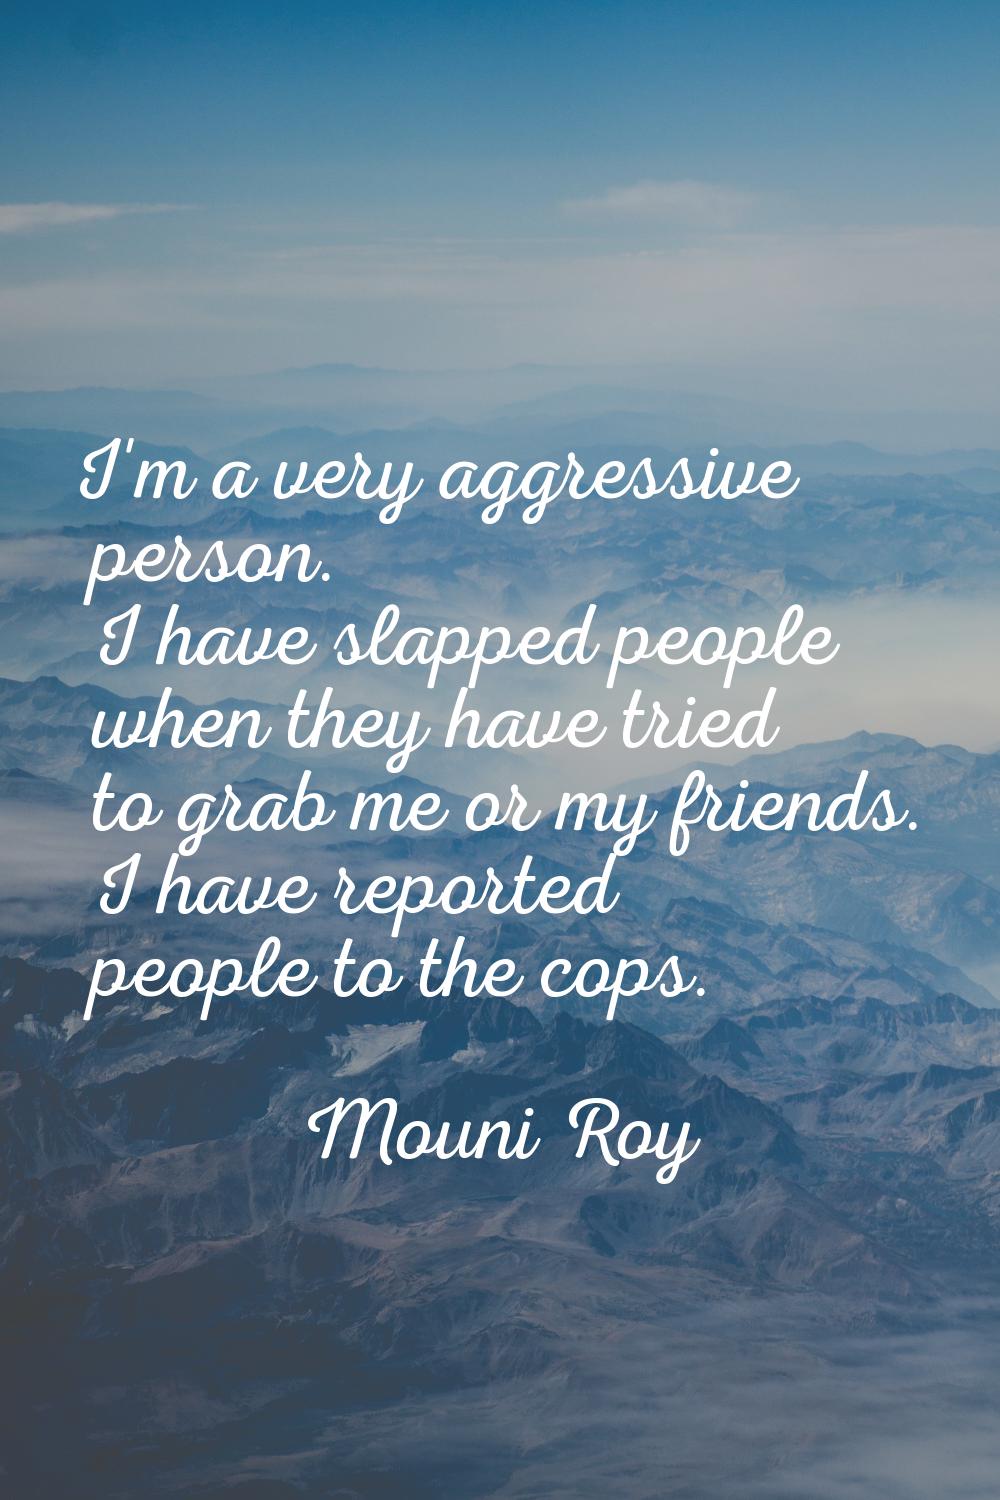 I'm a very aggressive person. I have slapped people when they have tried to grab me or my friends. 